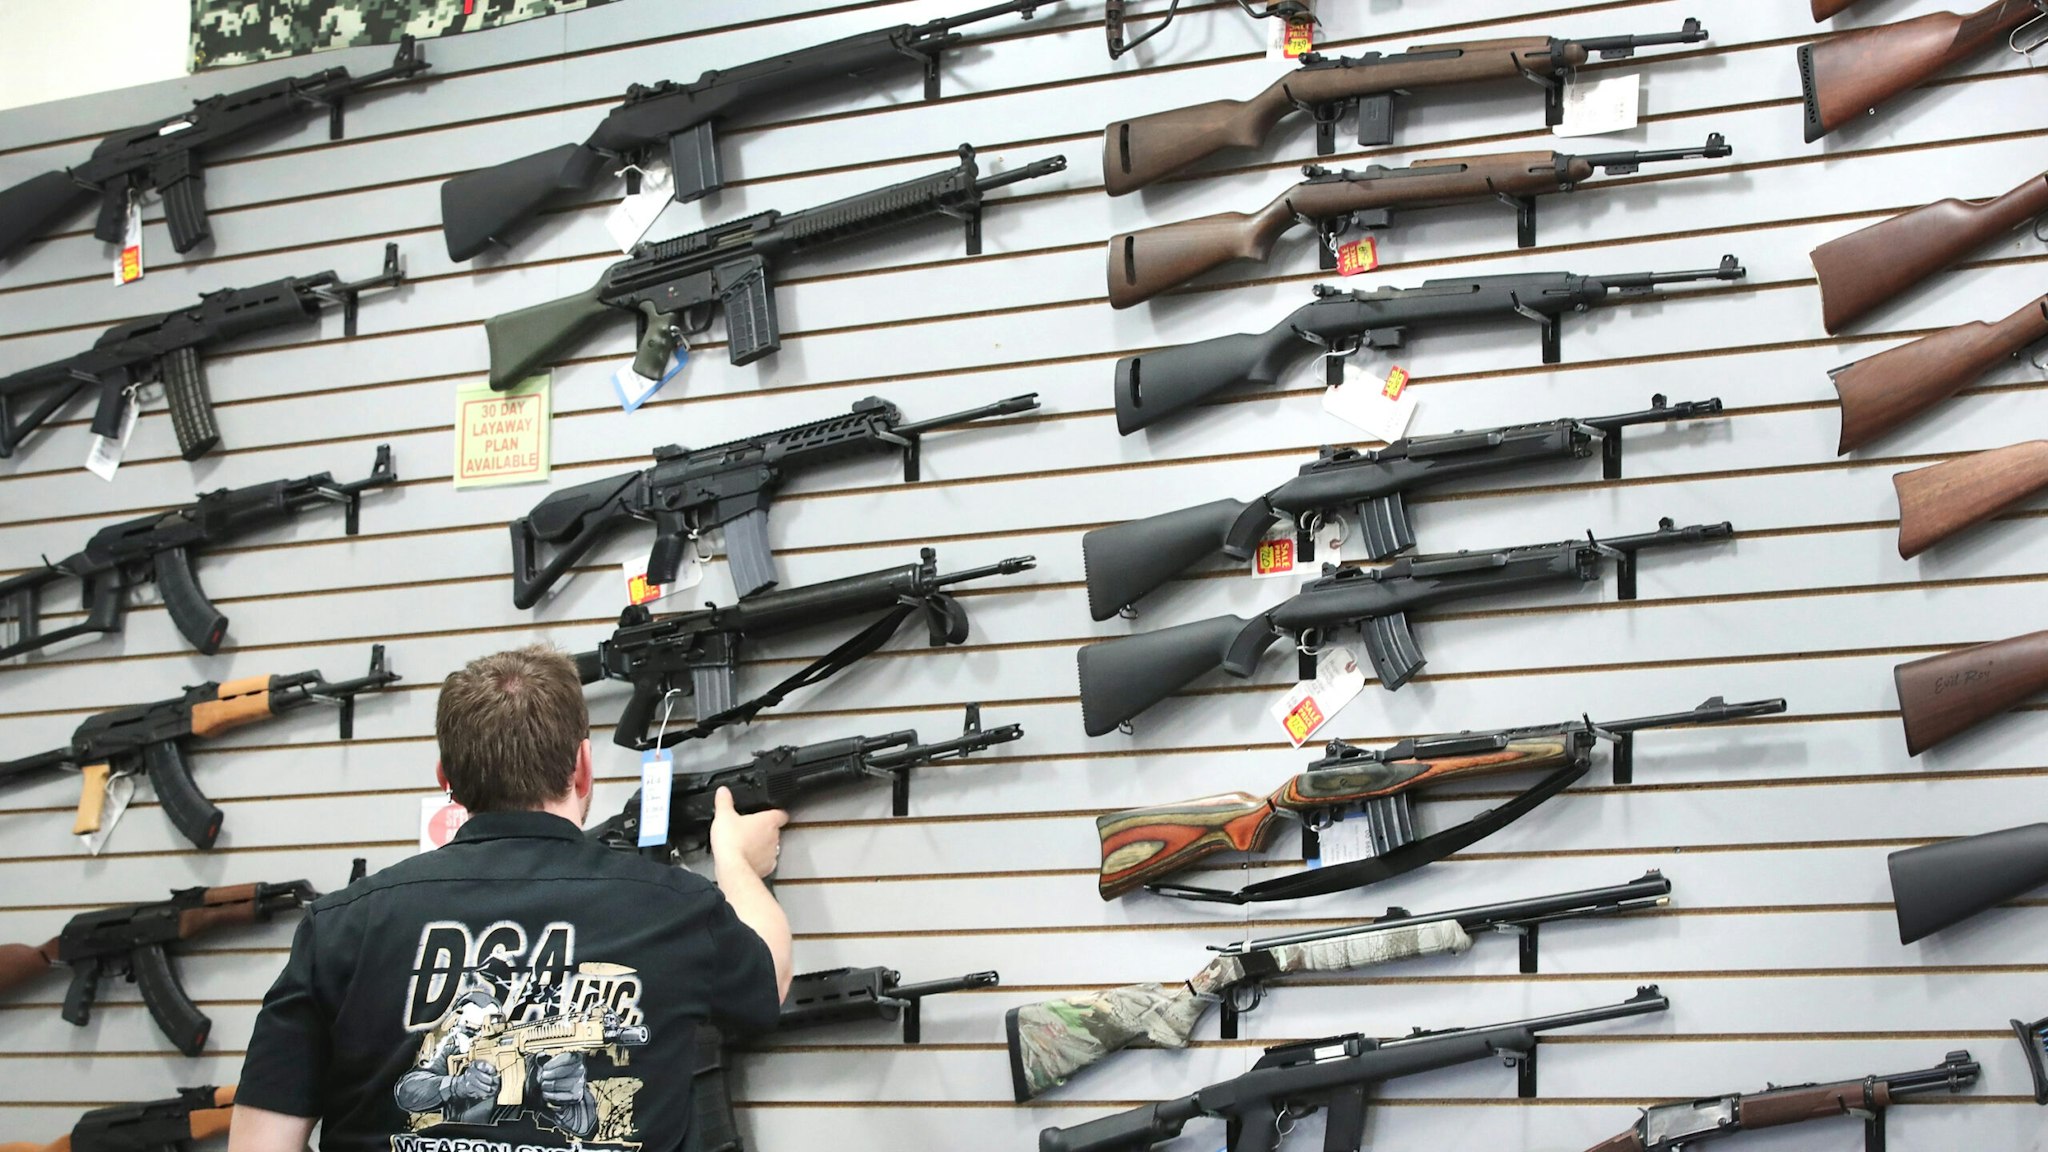 LAKE BARRINGTON, IL - JUNE 17: Guns built by DSA Inc and other manufacturers are displayed inside the DSA Inc. store on June 17, 2016 in Lake Barrington, Illinois. Earlier in the day the facility was the target of an anti gun protest. DSA Inc. manufactures FAL, AR-15 and RPD rifles.